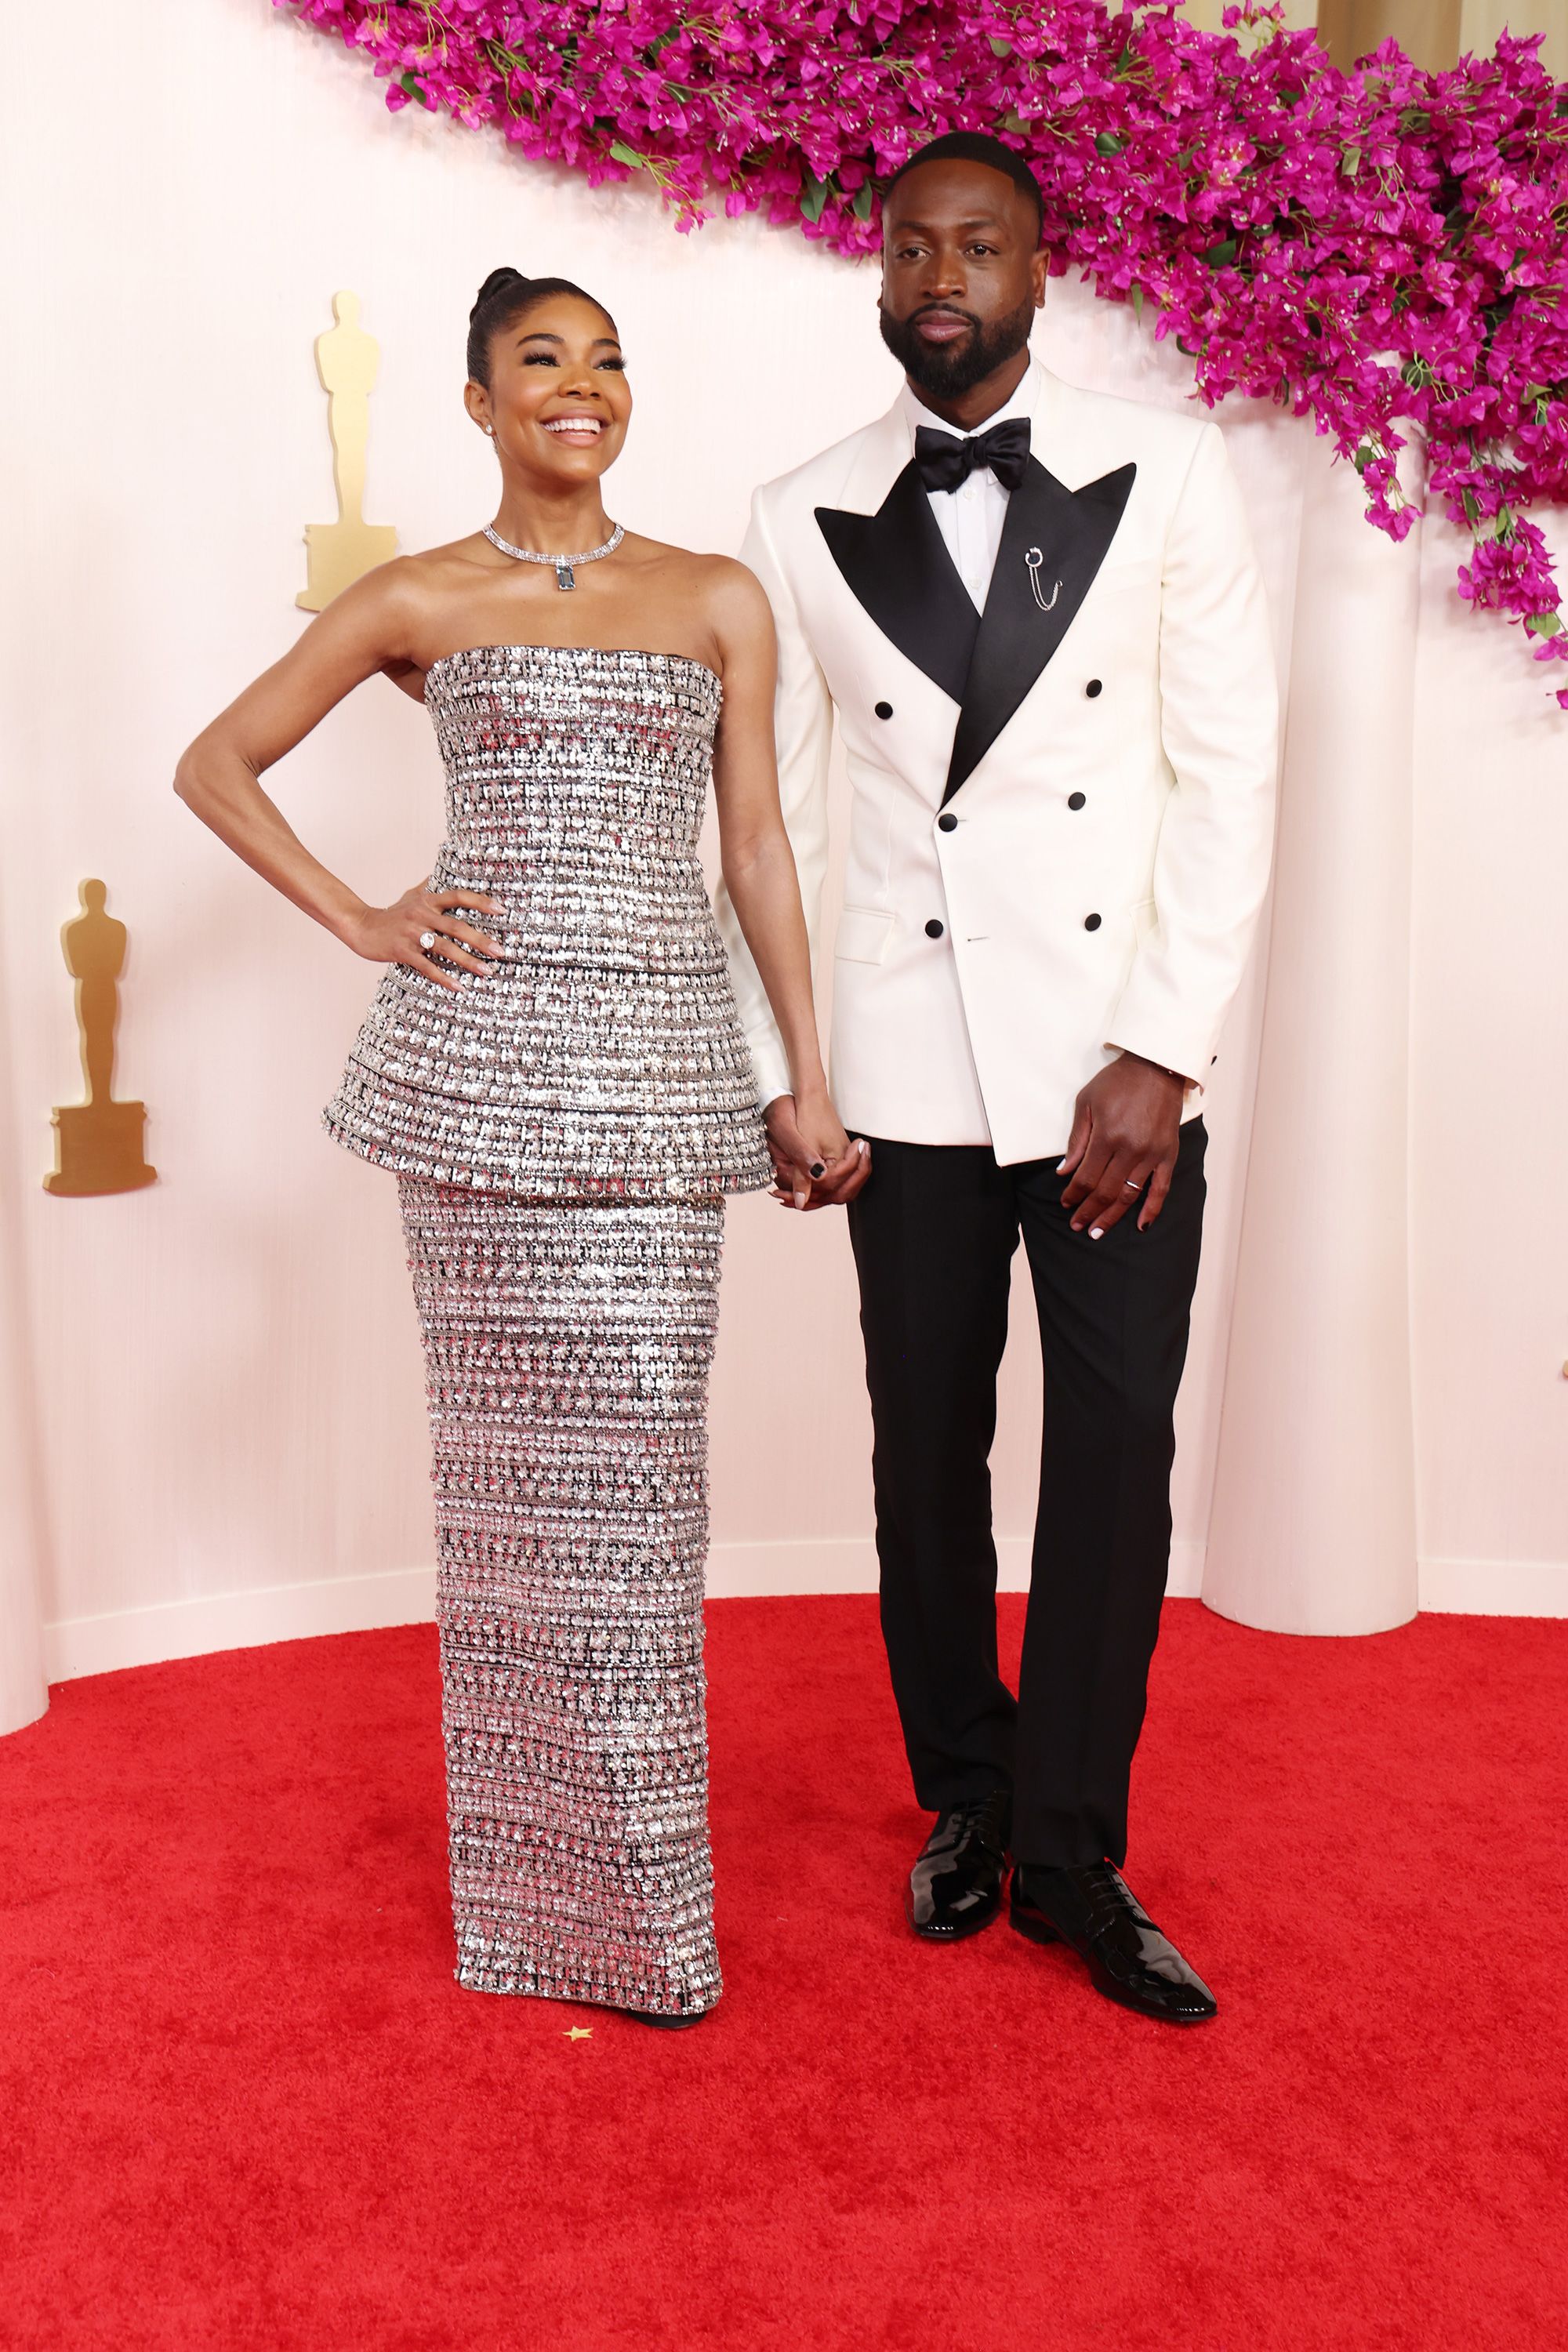 Gabrielle Union, photographed with husband Dwyane Wade (wearing a custom Atelier Versace dress), turned heads in a stunning Carolina Herrera dress paired with a matching floor-length skirt.  She completed her look with a diamond necklace from Tiffany & Co.